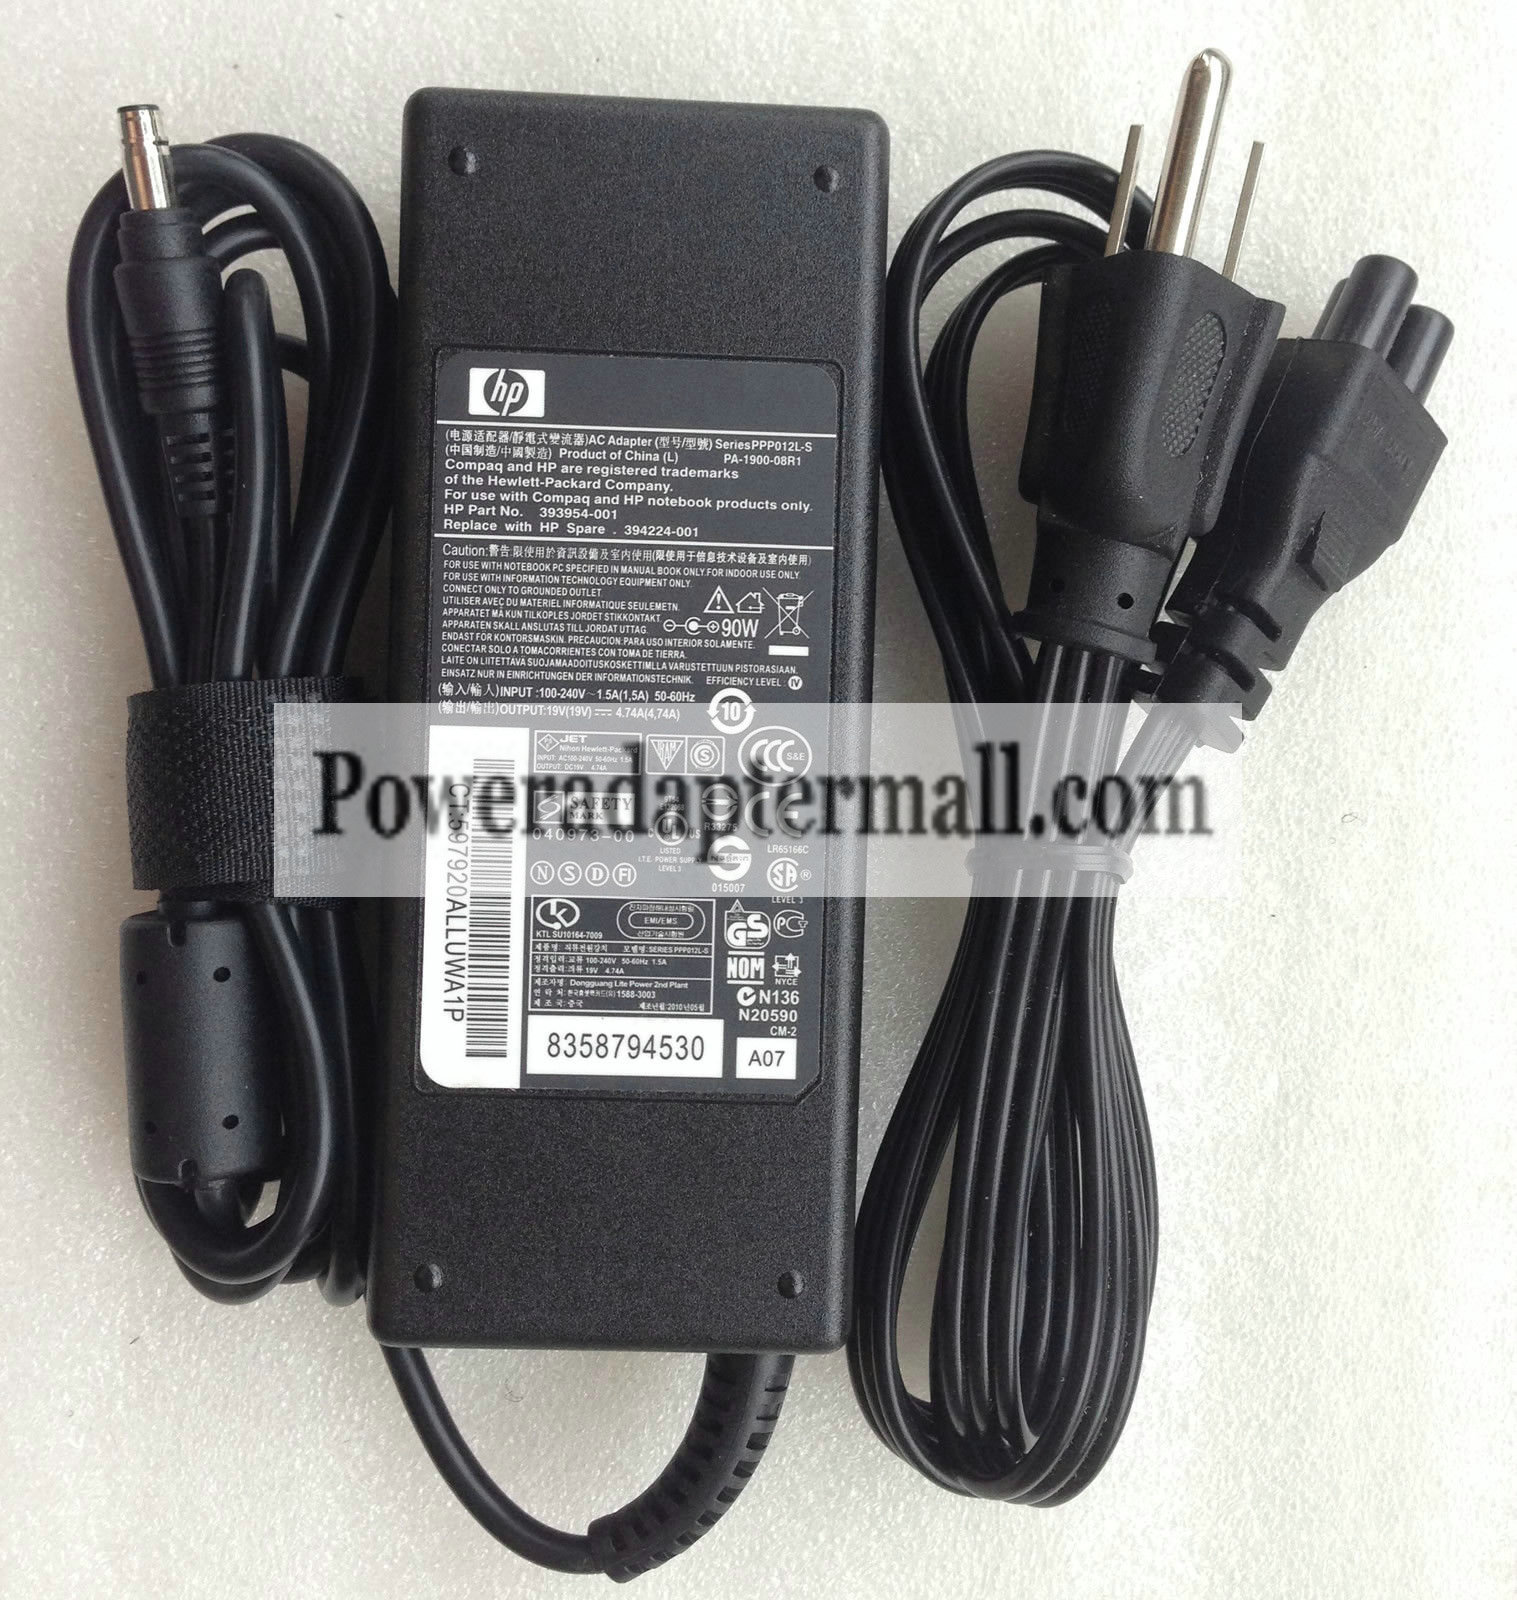 19V 4.74A 90W HP Compaq nw8240 Mobile Workstation AC Adapter